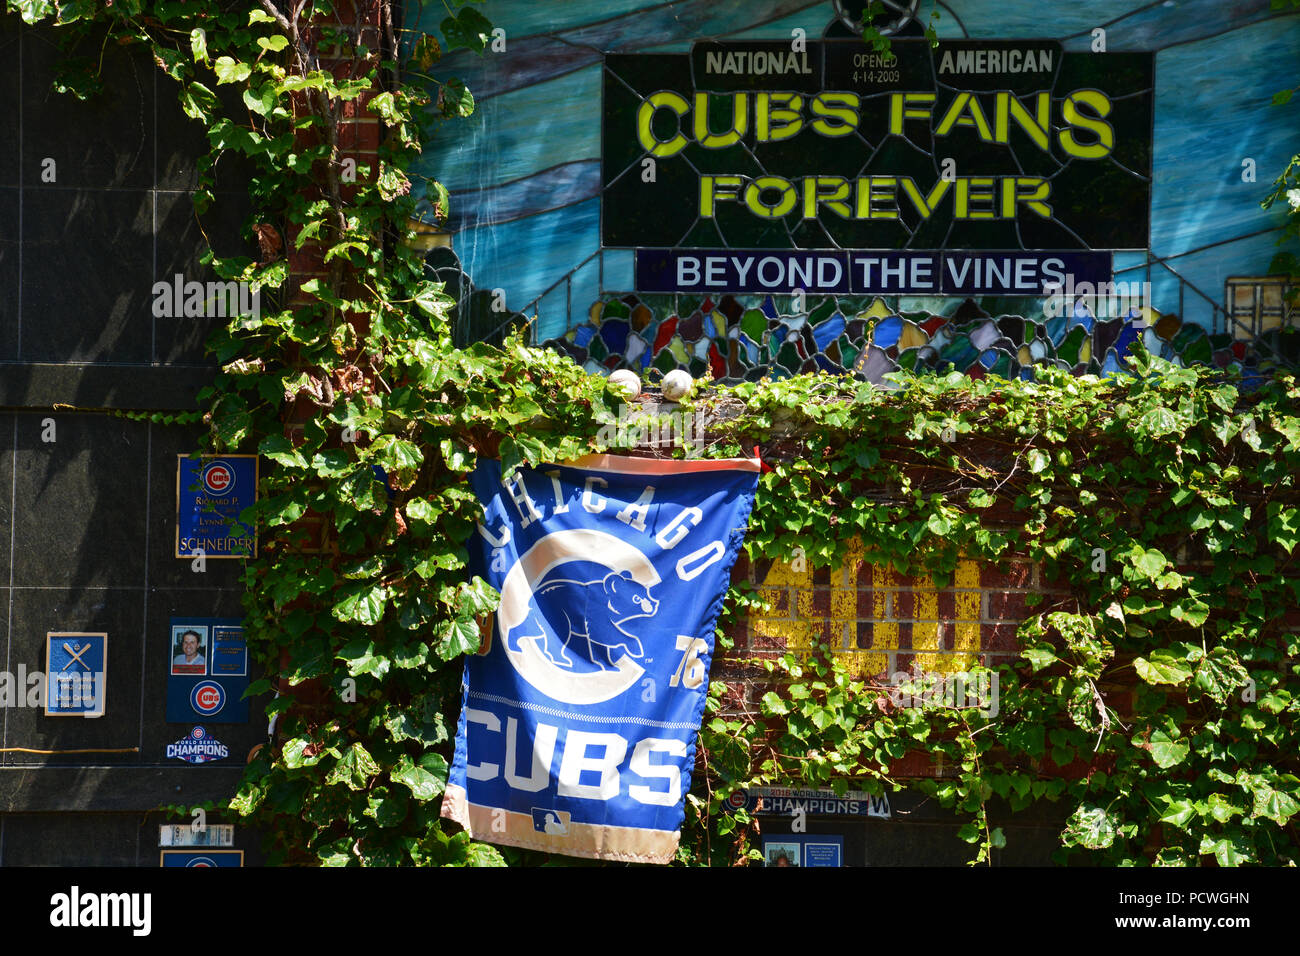 Beyond The Vines is a Chicago Cubs themed columbarium where fans can be interned in a brick outfield wall with ivy and seats from Wrigley Field Stock Photo